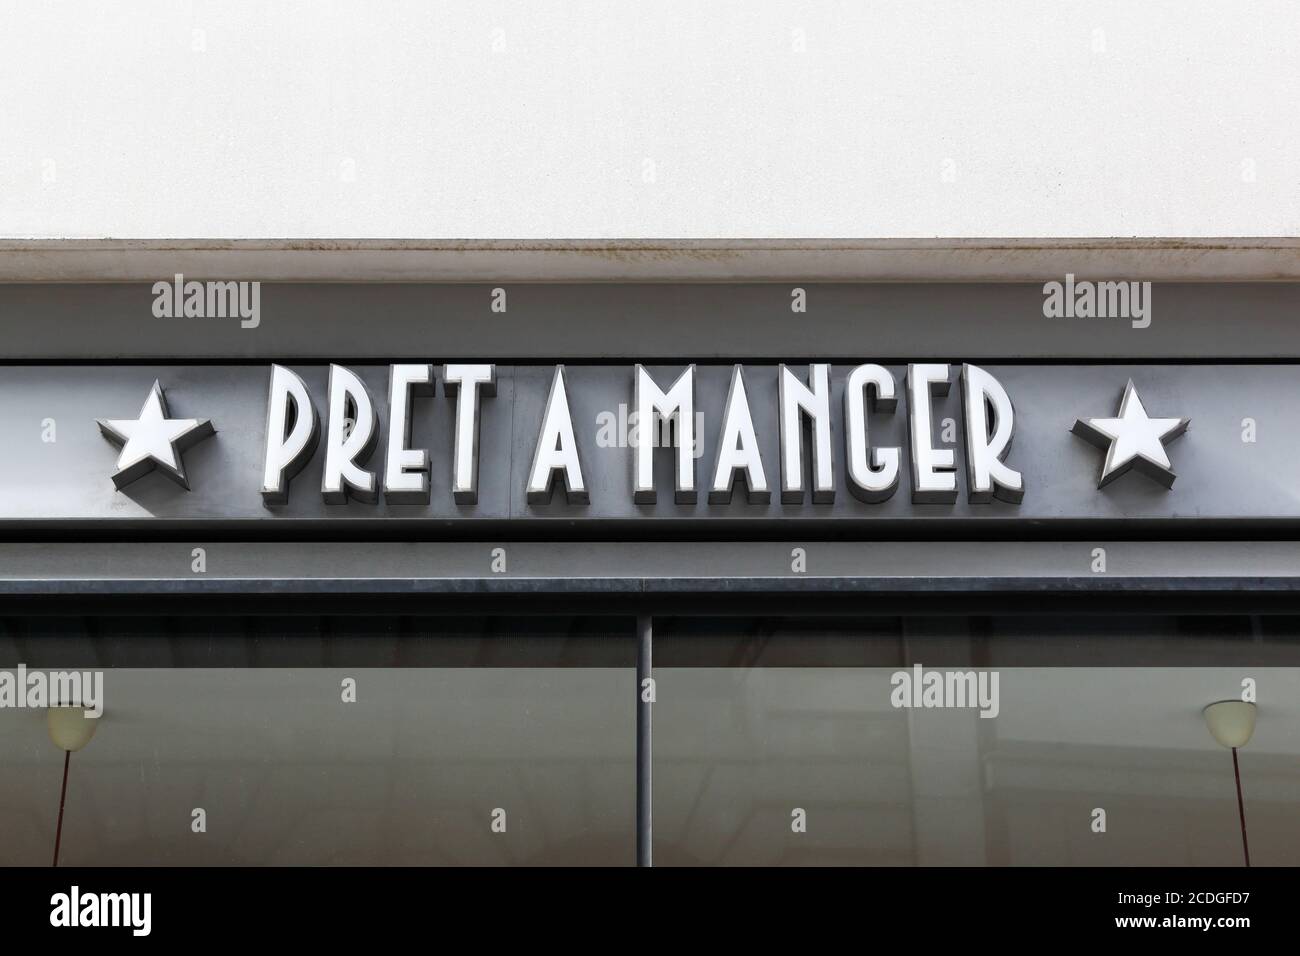 London, United Kingdom - September 25, 2019: Pret a manger logo on a wall. Pret a Manger is an international sandwich shop chain based in the UK Stock Photo